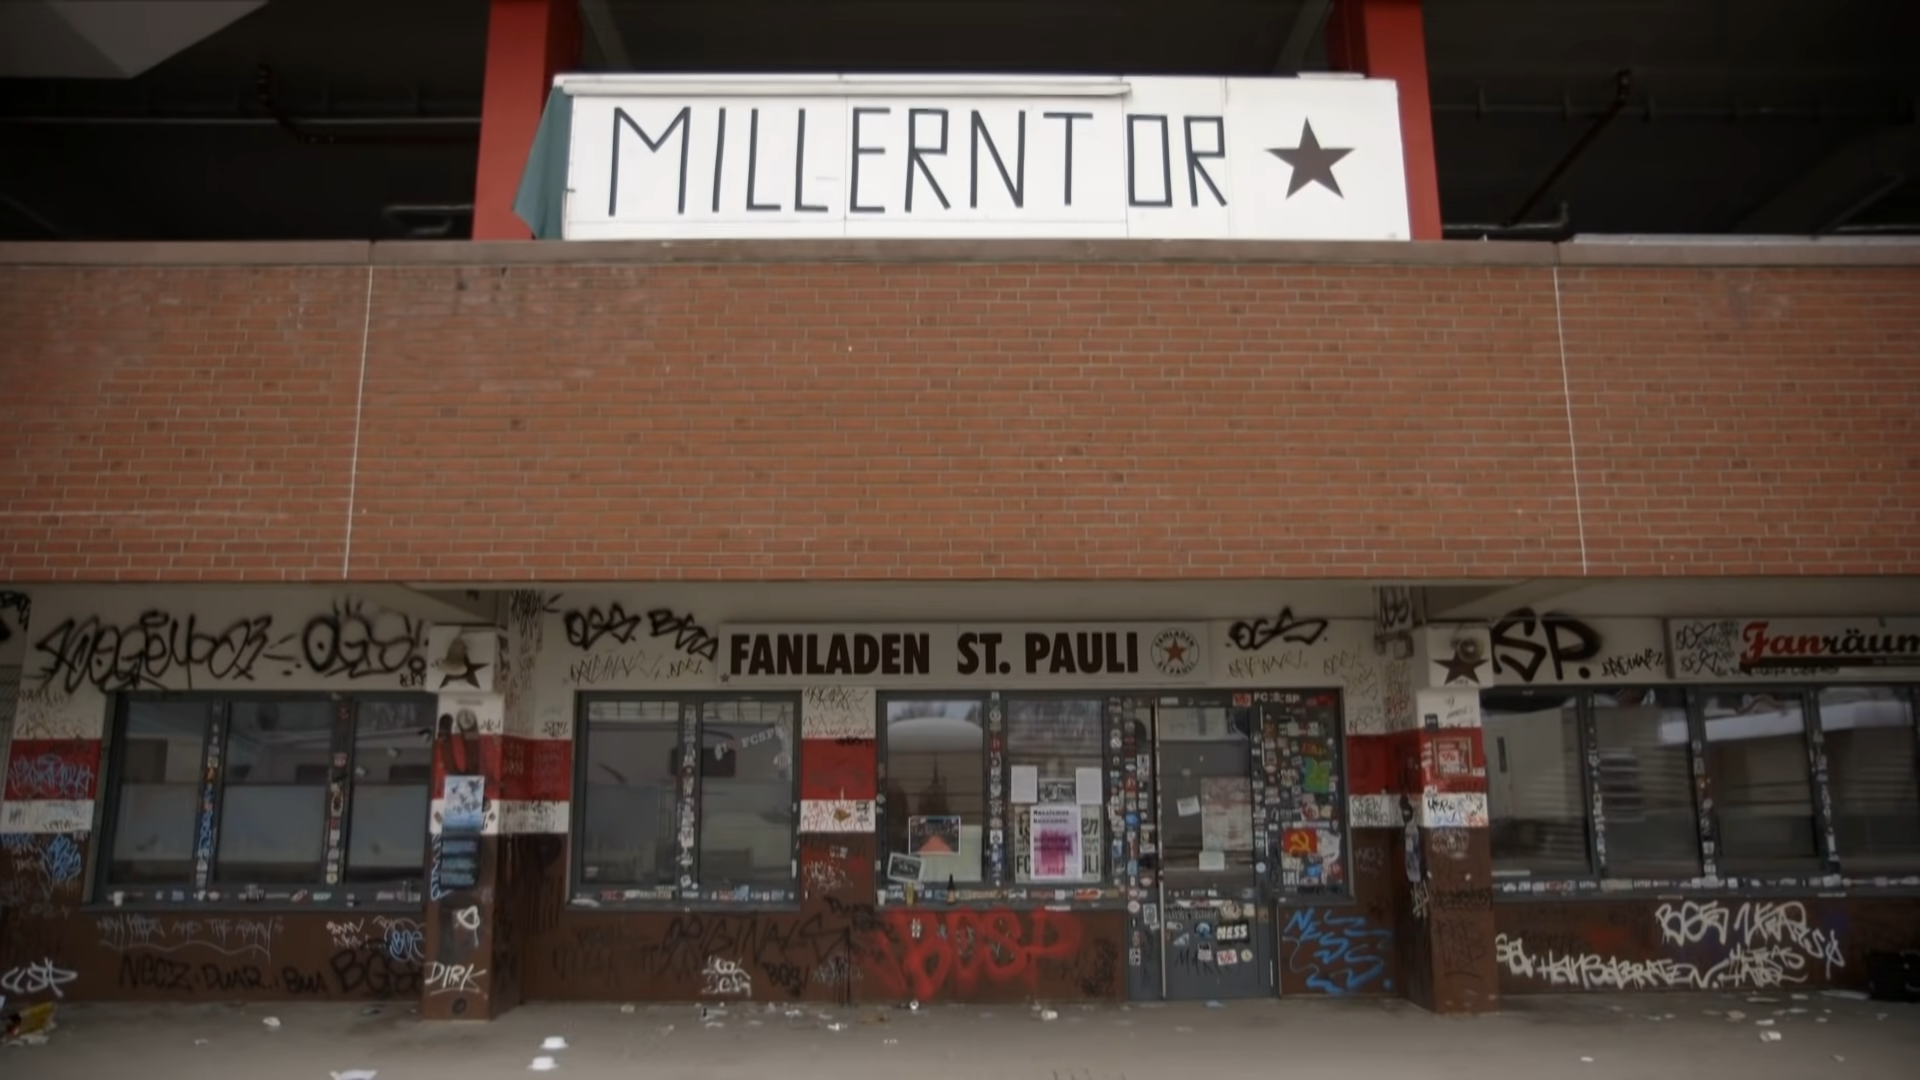 Millerntor-Stadion, St. Pauli (fonte: canale YouTube "Copa90 Stories")